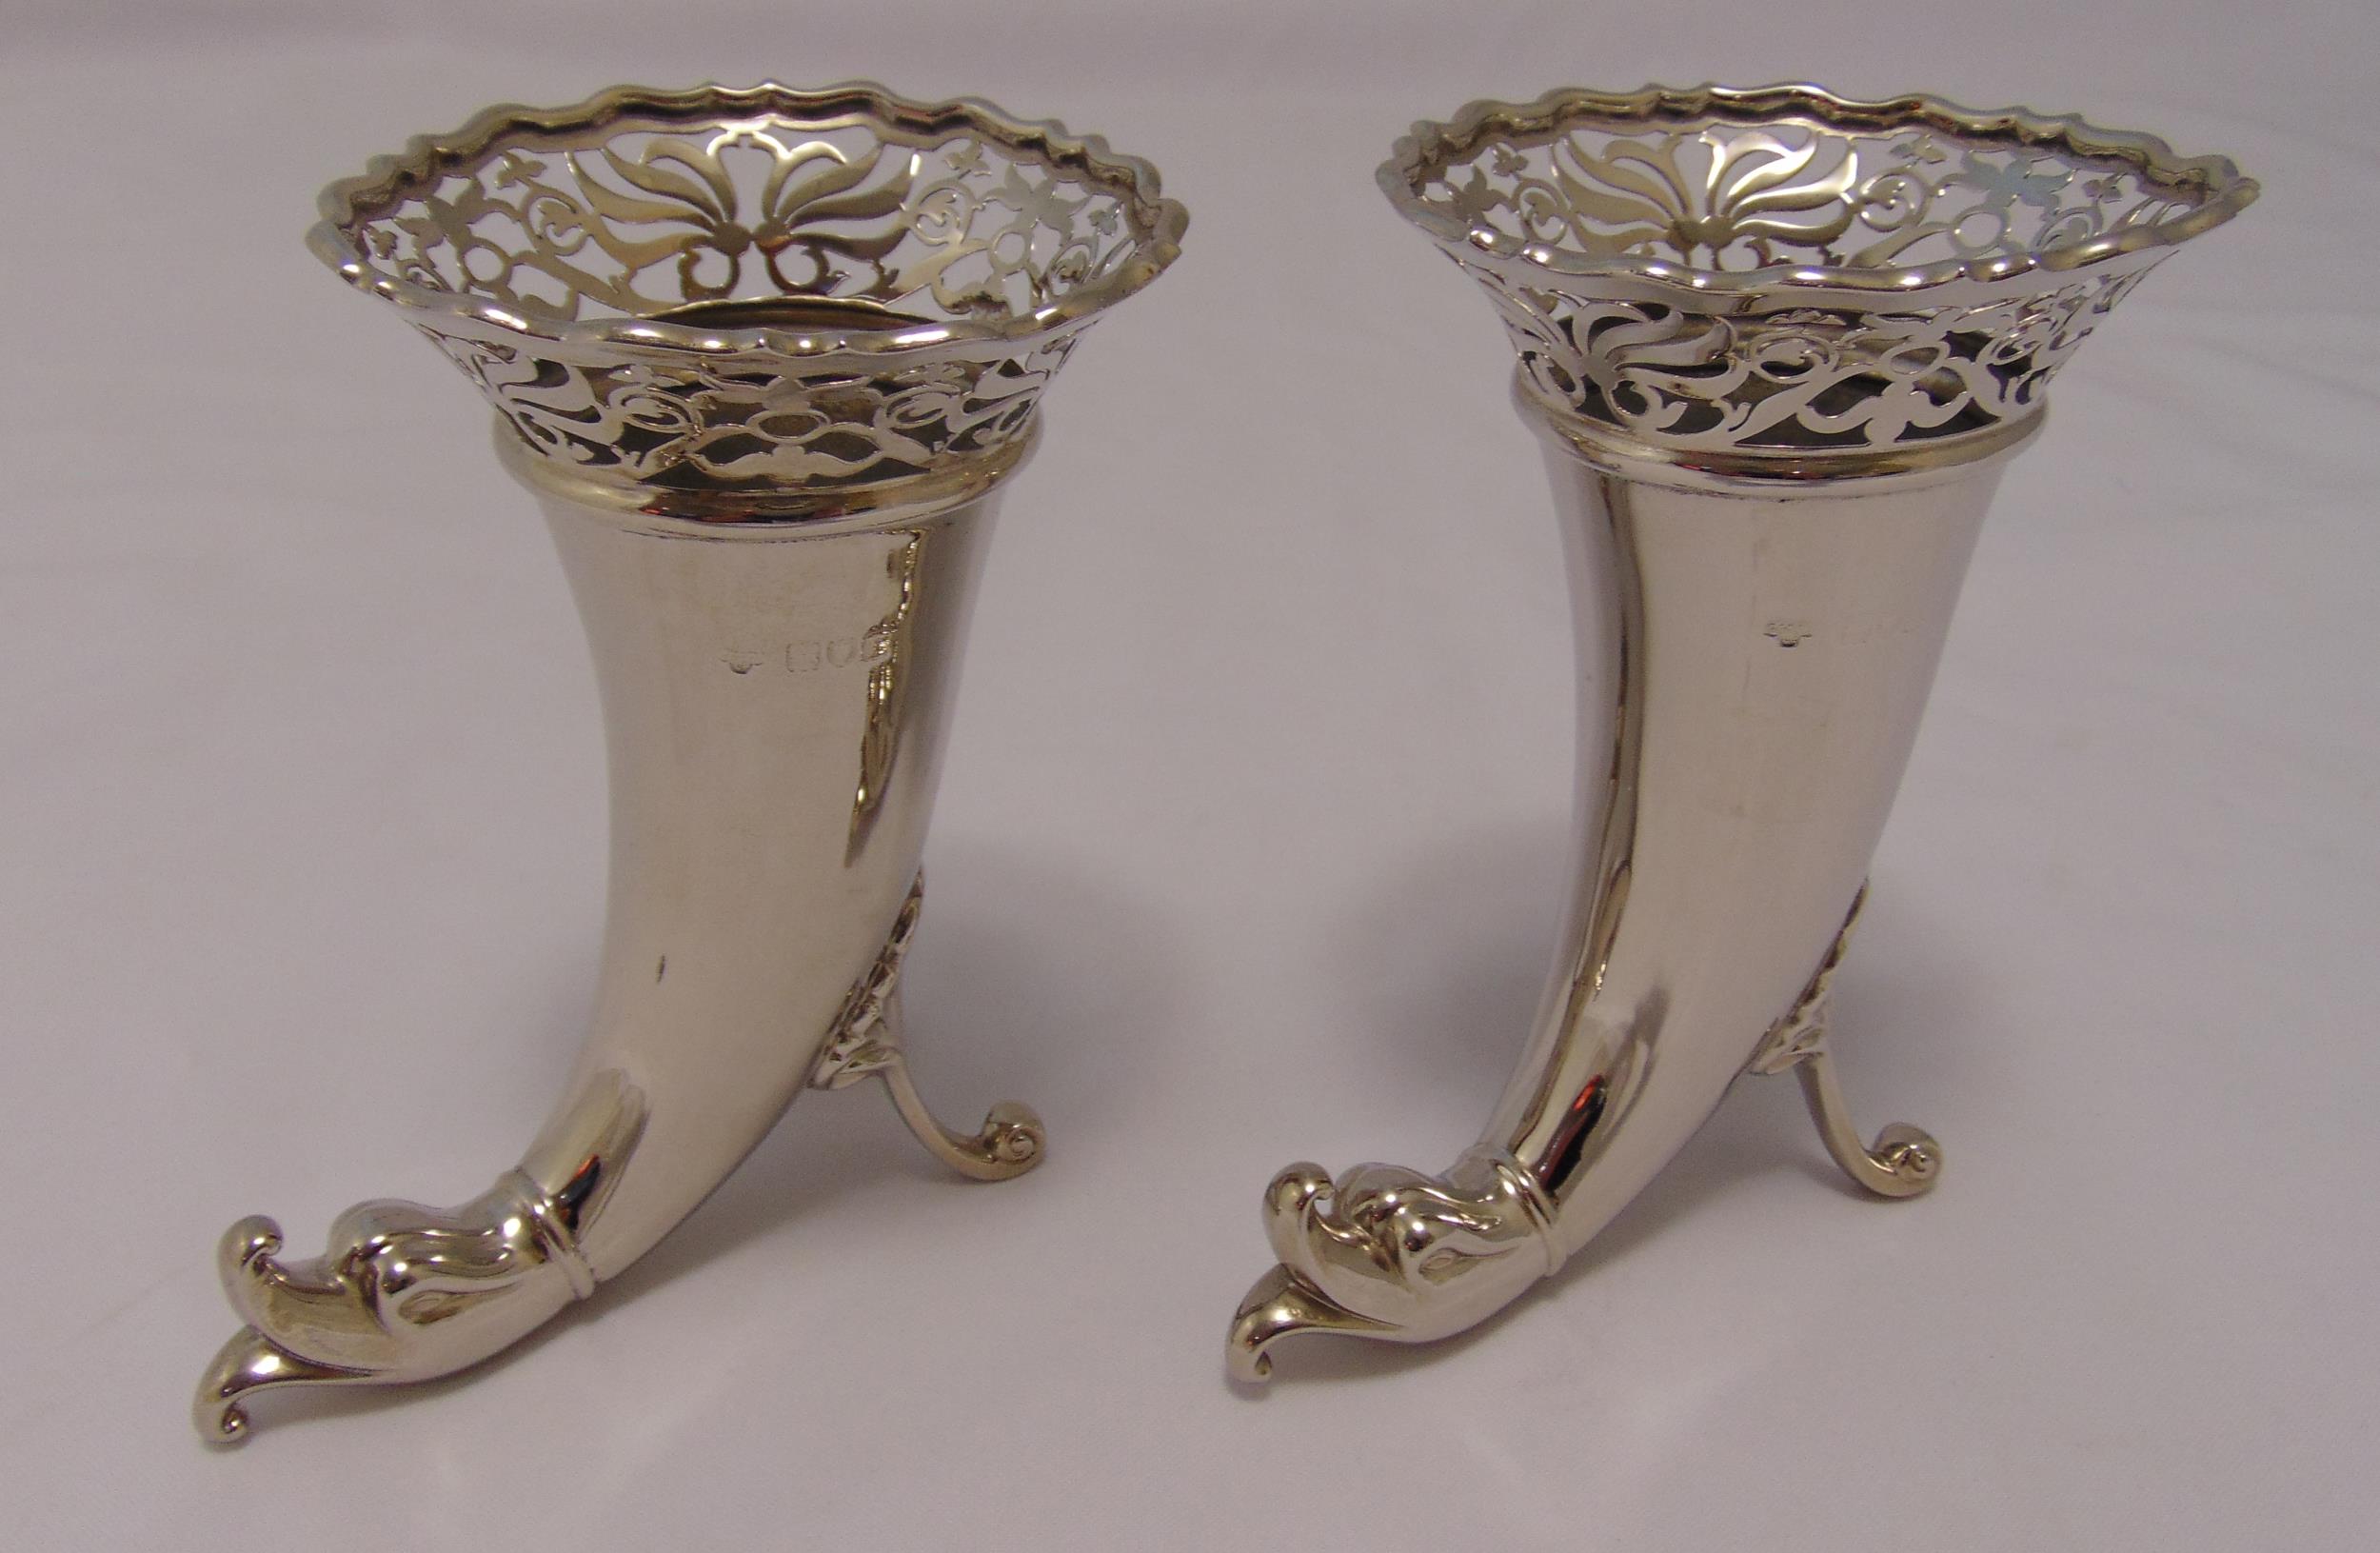 A pair of Goldsmiths and Silversmiths Company silver vases of horn shape with scroll pierced tops